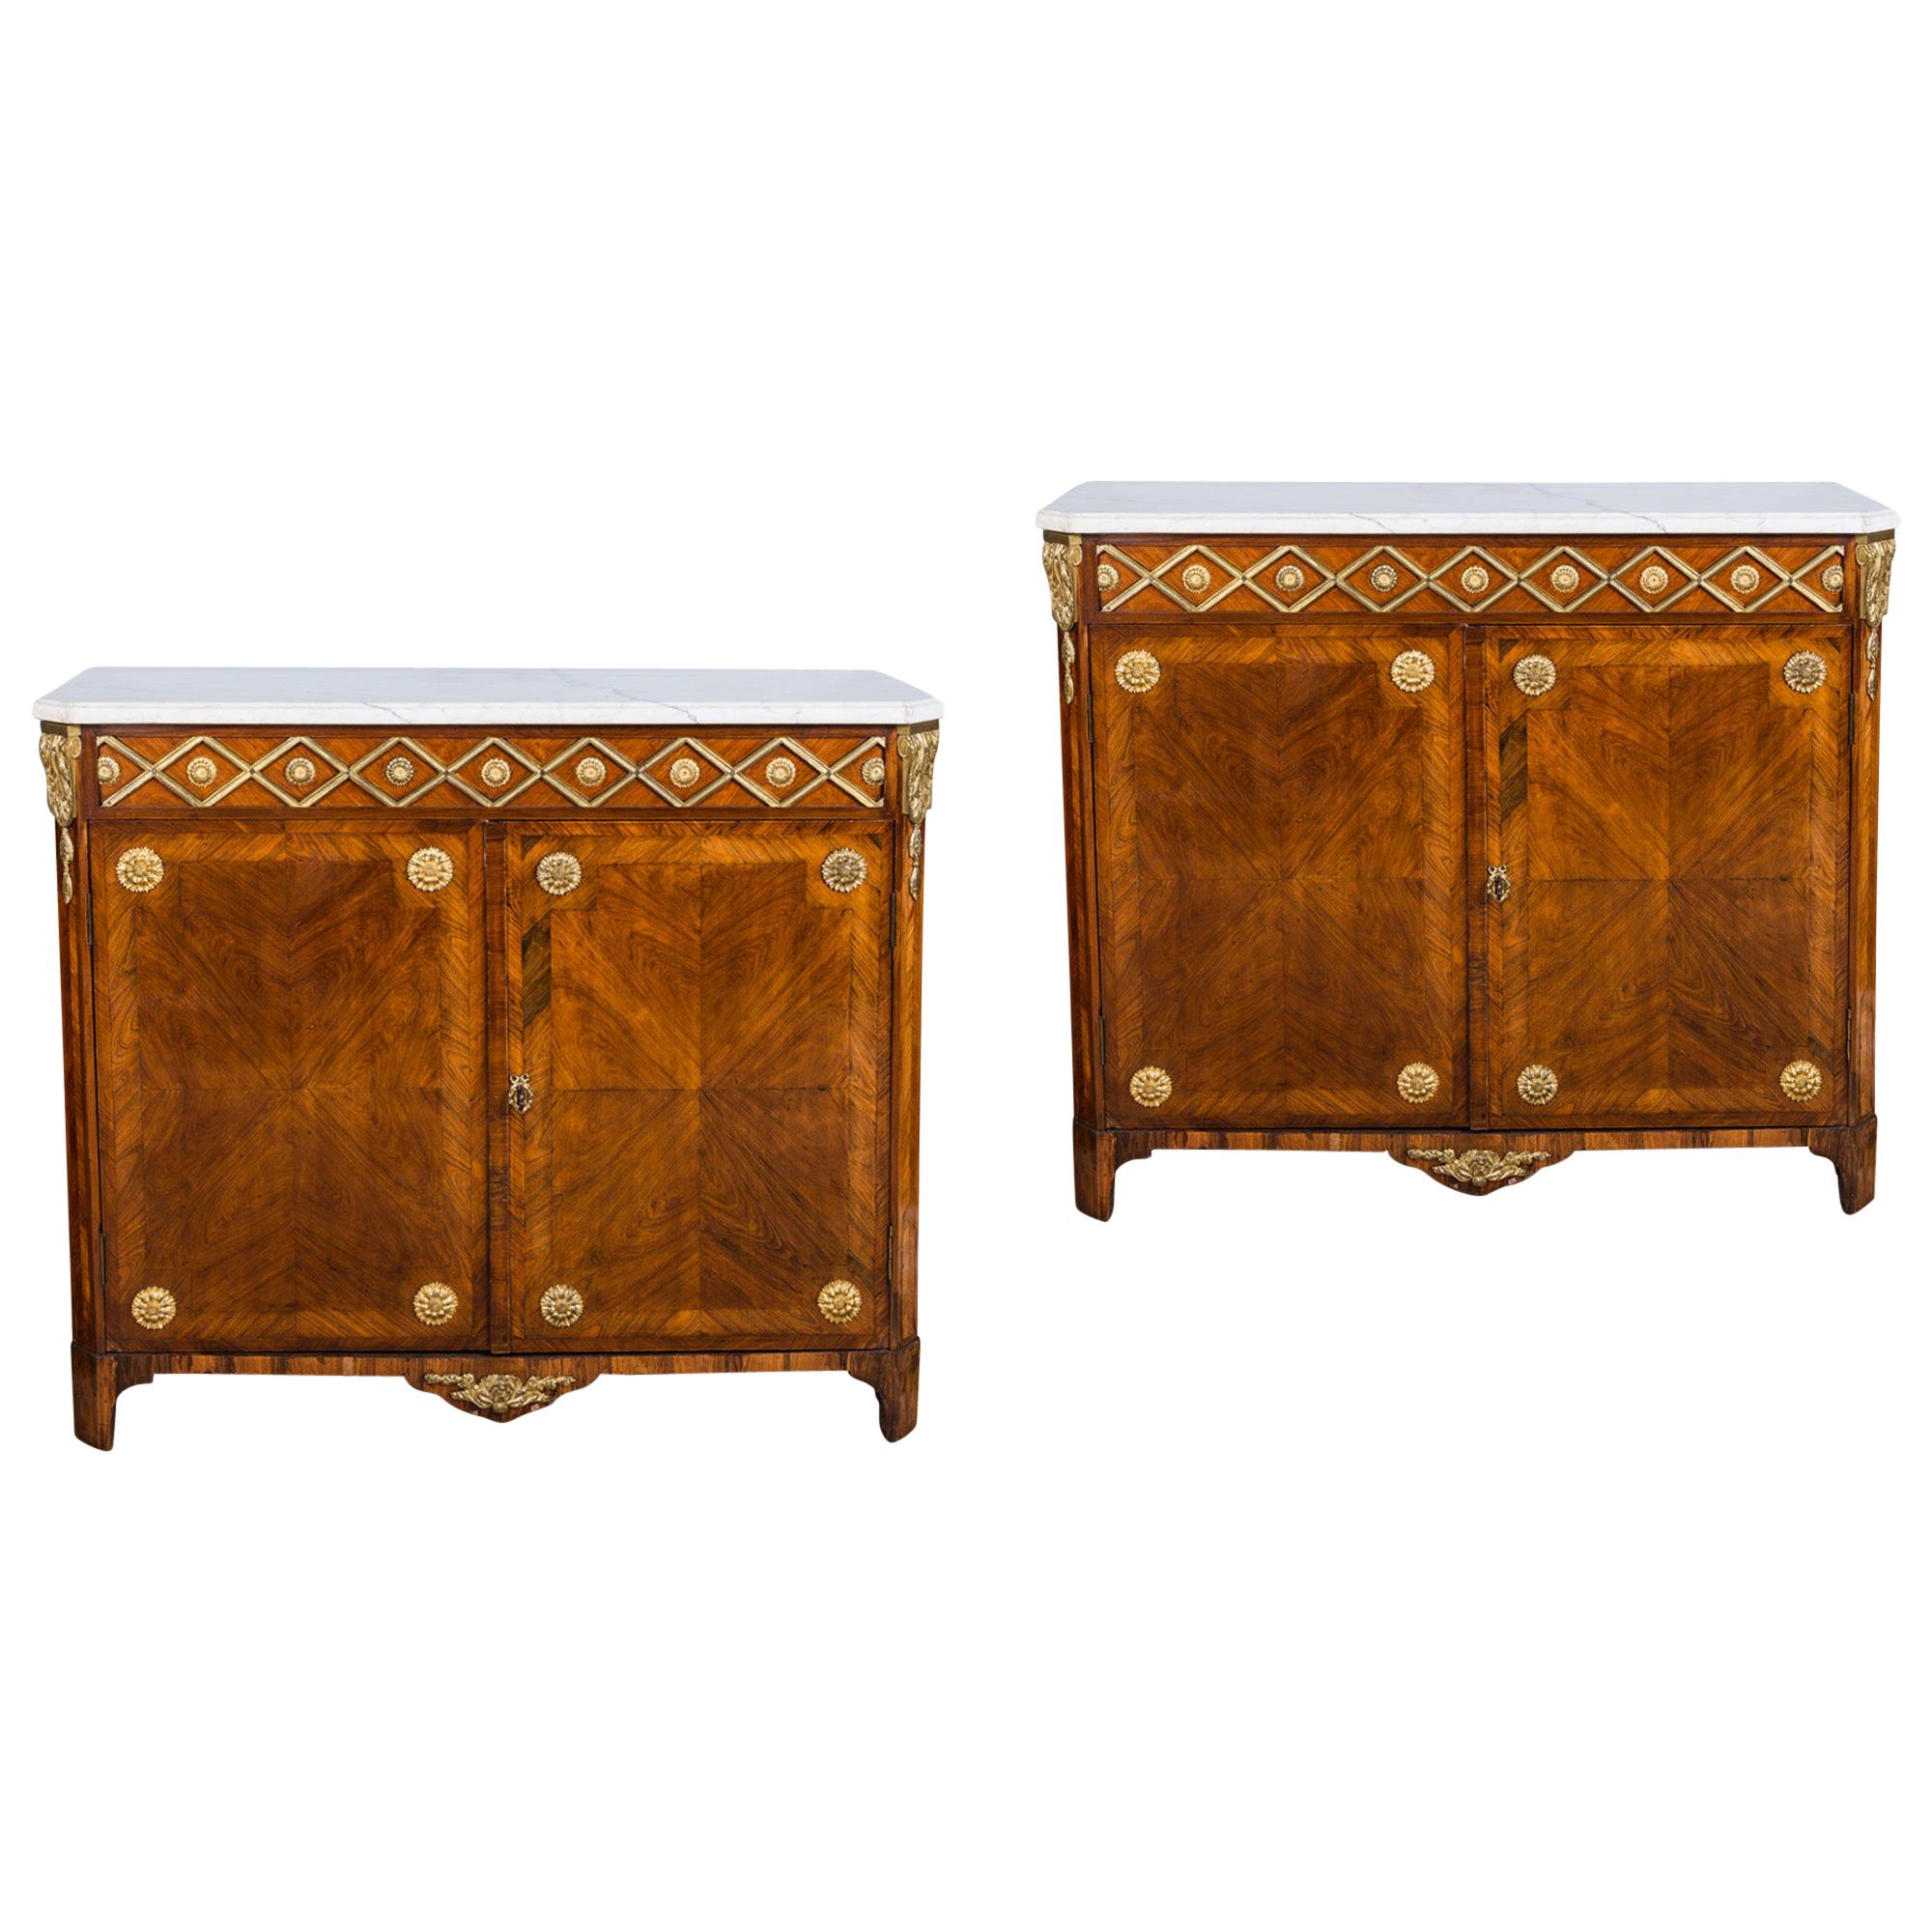 Pair of 18th Century Louis XVI Ormolu Mounted Parquetry Cabinets.